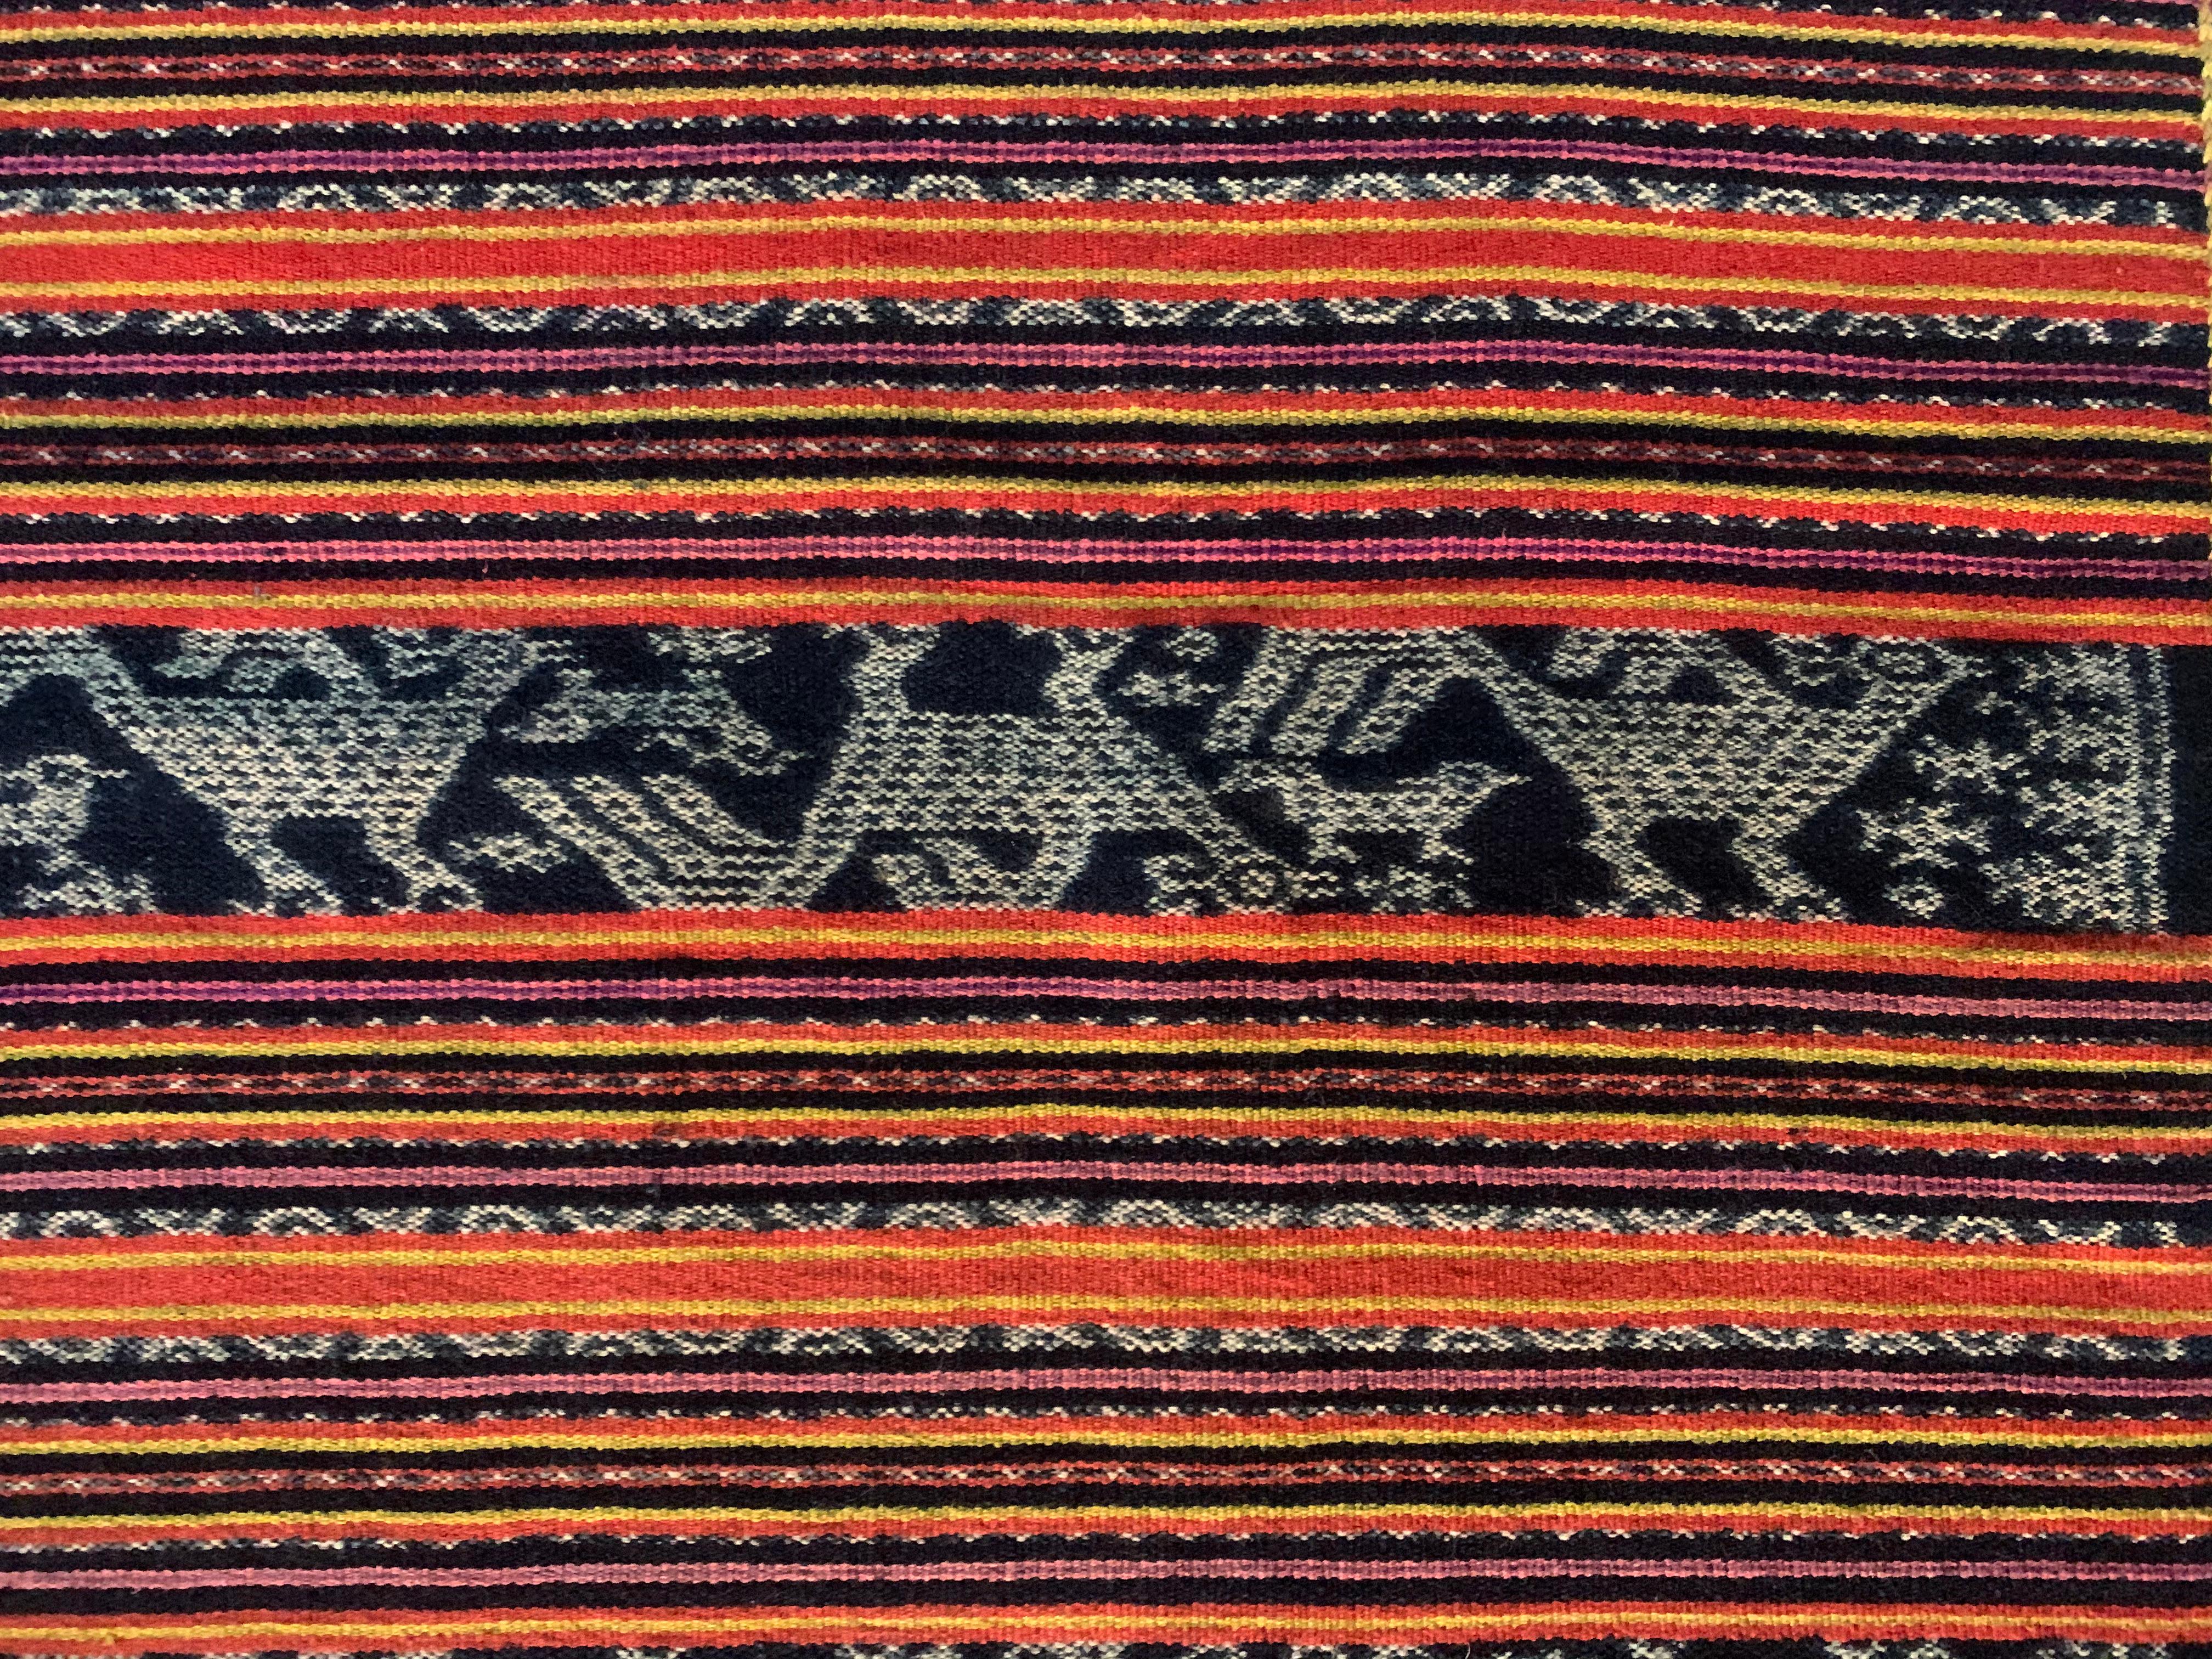 Hand-Woven Ikat Textile from Timor with Stunning Tribal Motifs & Colours, Indonesia